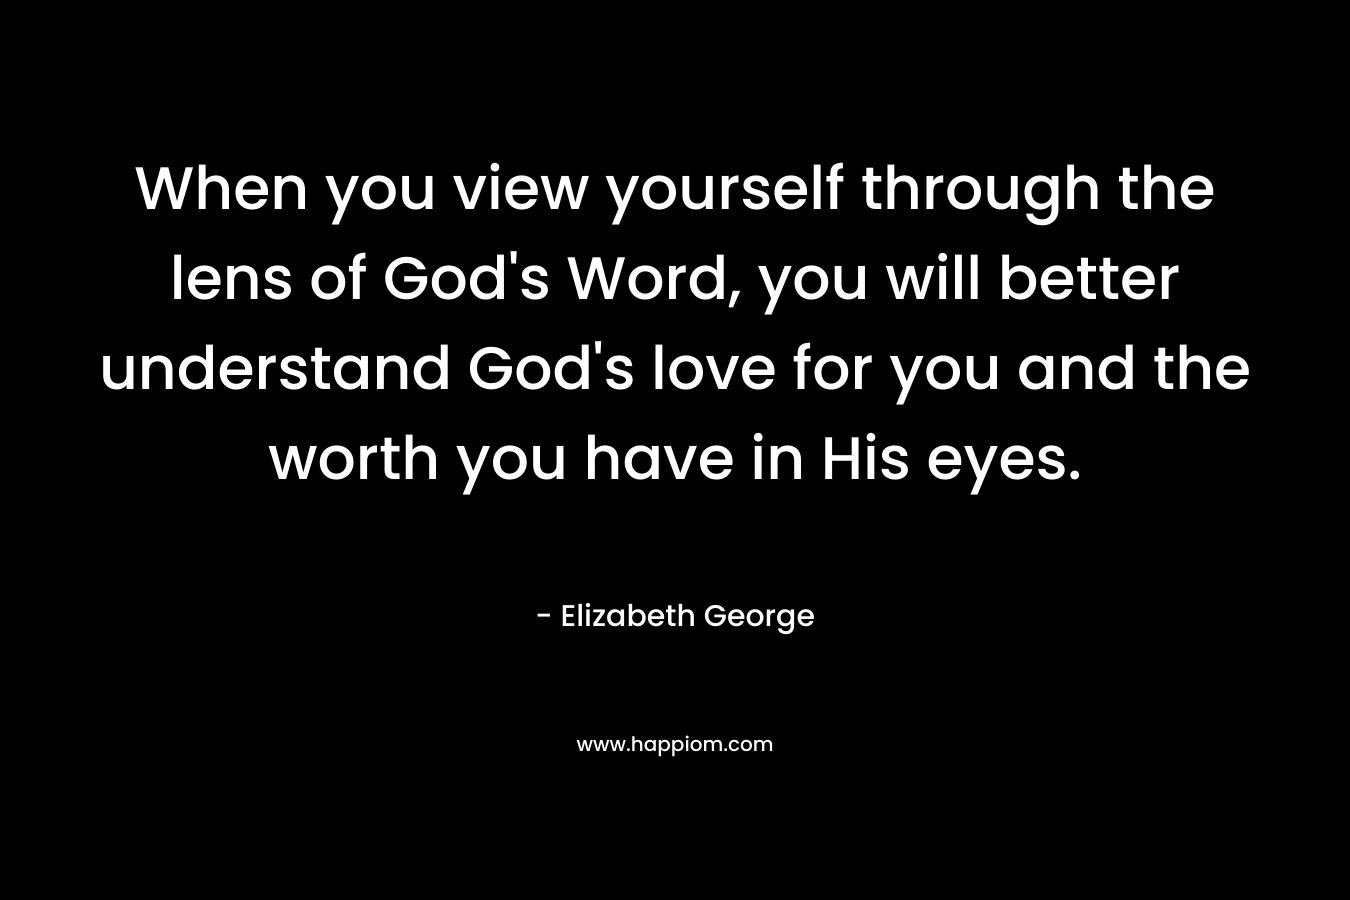 When you view yourself through the lens of God’s Word, you will better understand God’s love for you and the worth you have in His eyes. – Elizabeth George